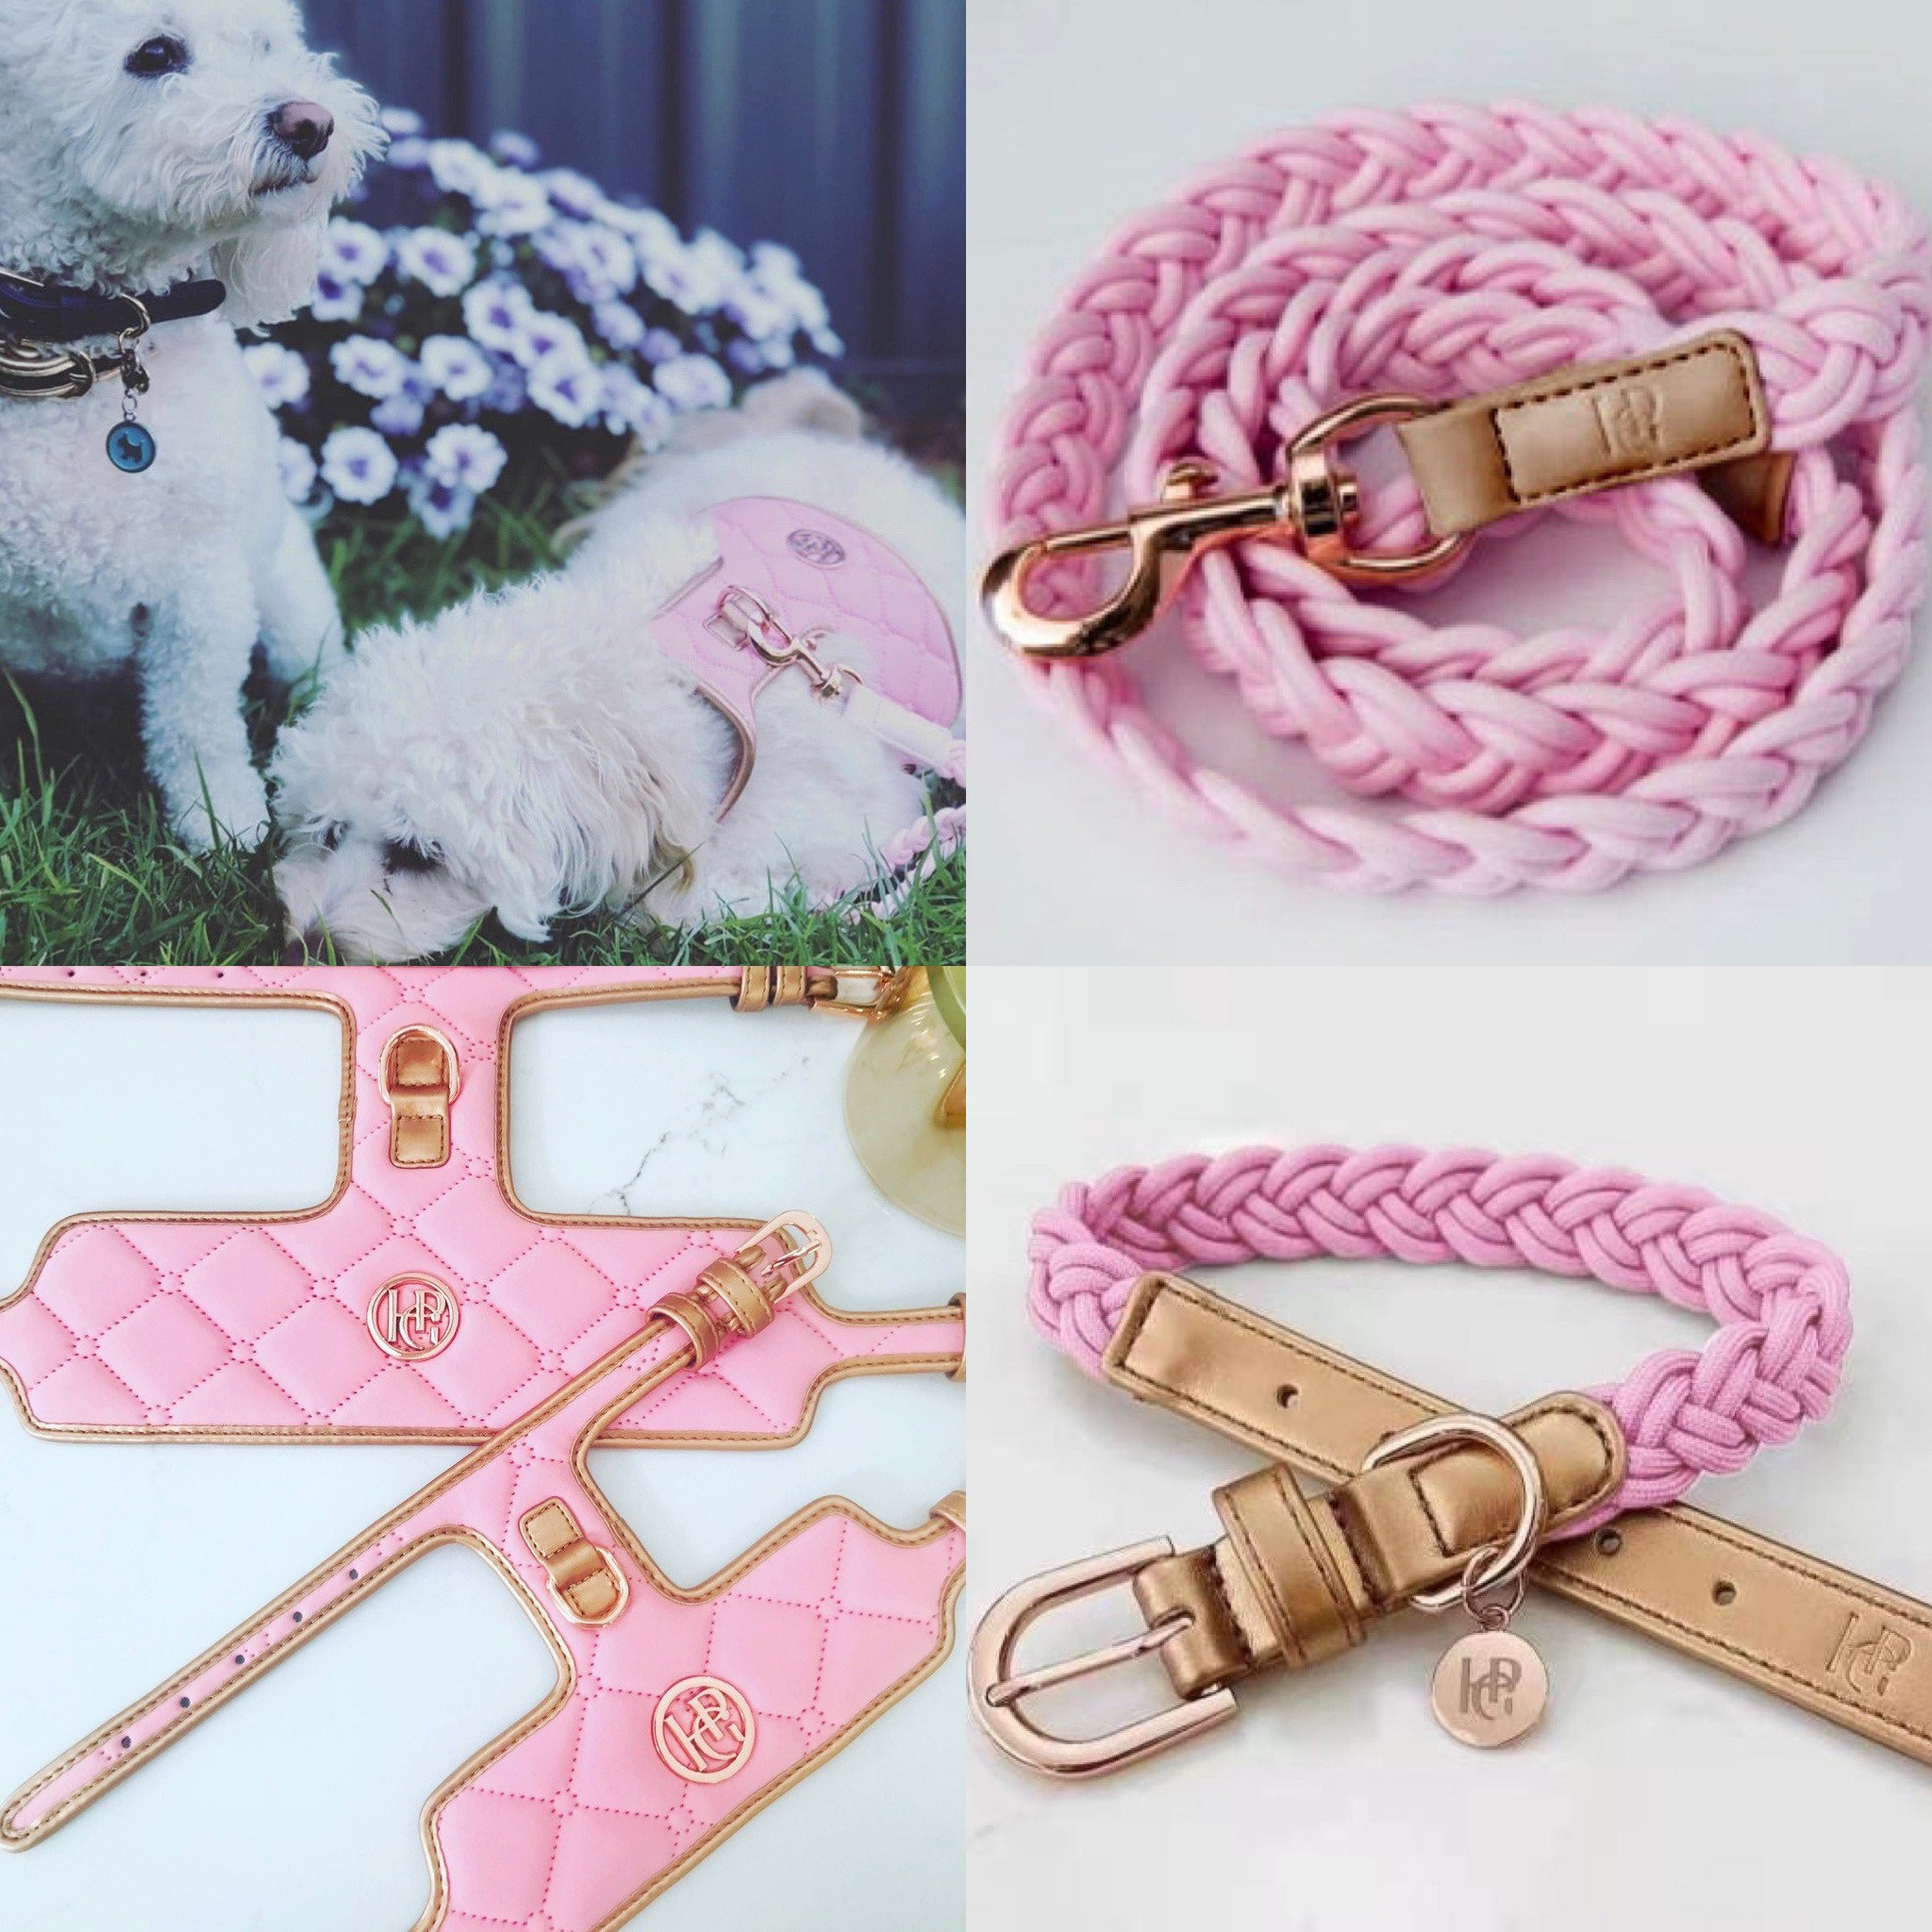 Buy Chanel Dog Harness Online In India -  India